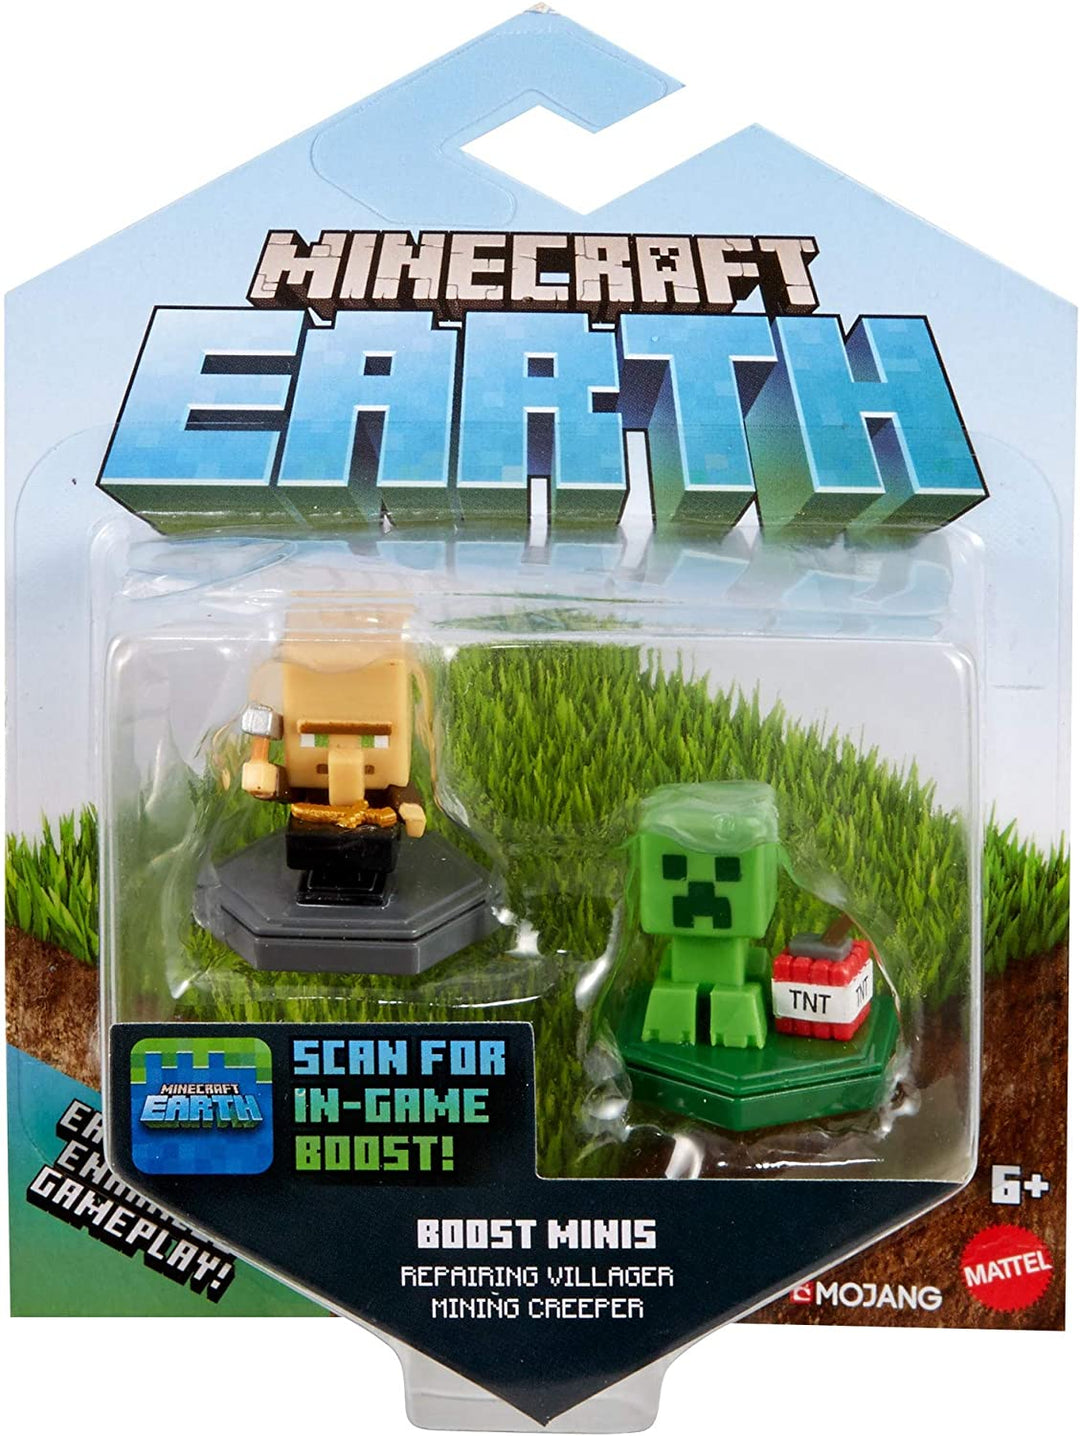 Minecraft Earth Boost Mini Figures 2-Pack NFC-Chip Toys, Earth Augmented Reality Mobile Game, Based on Video Game, Great for Playing, Trading, and Collecting, Adventure Toy for Boys and Girl